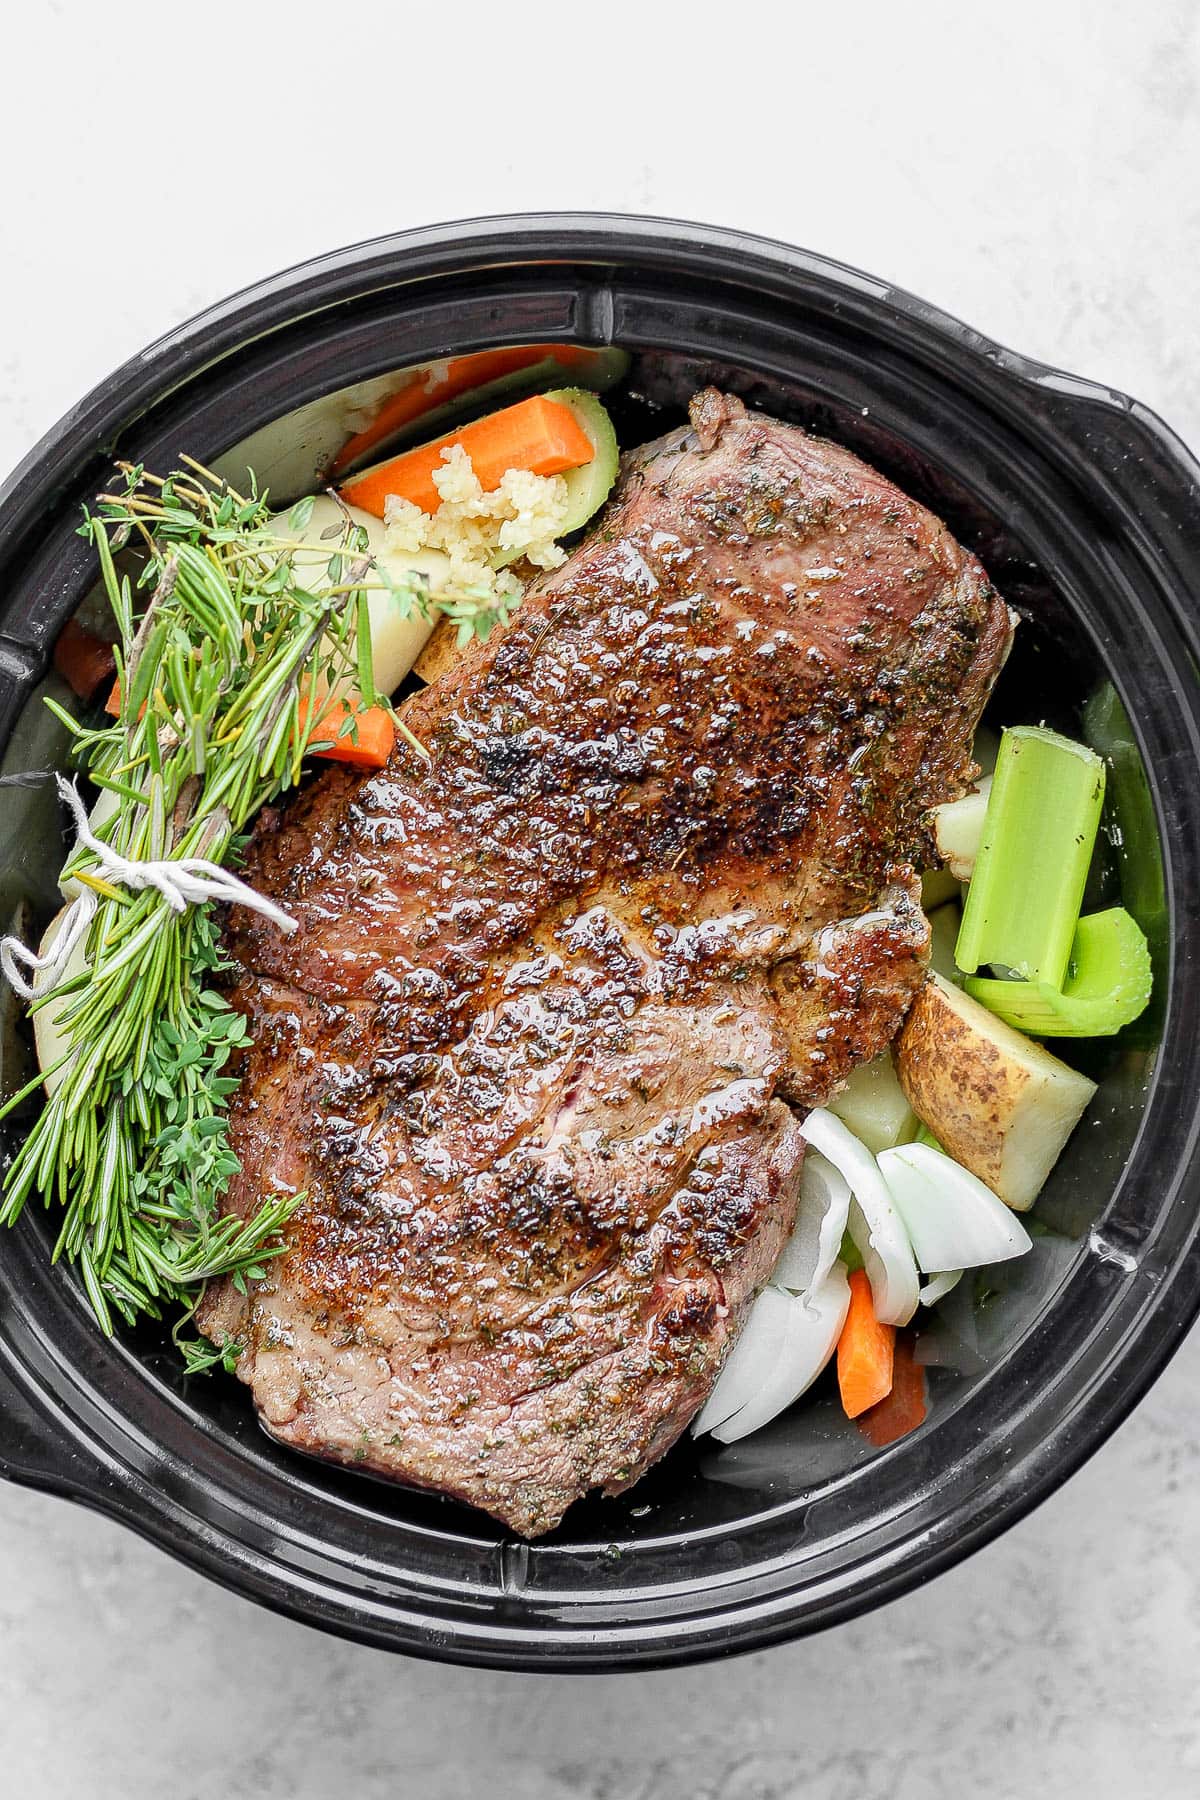 Slow cooker with beef roast, vegetables, and herbs.